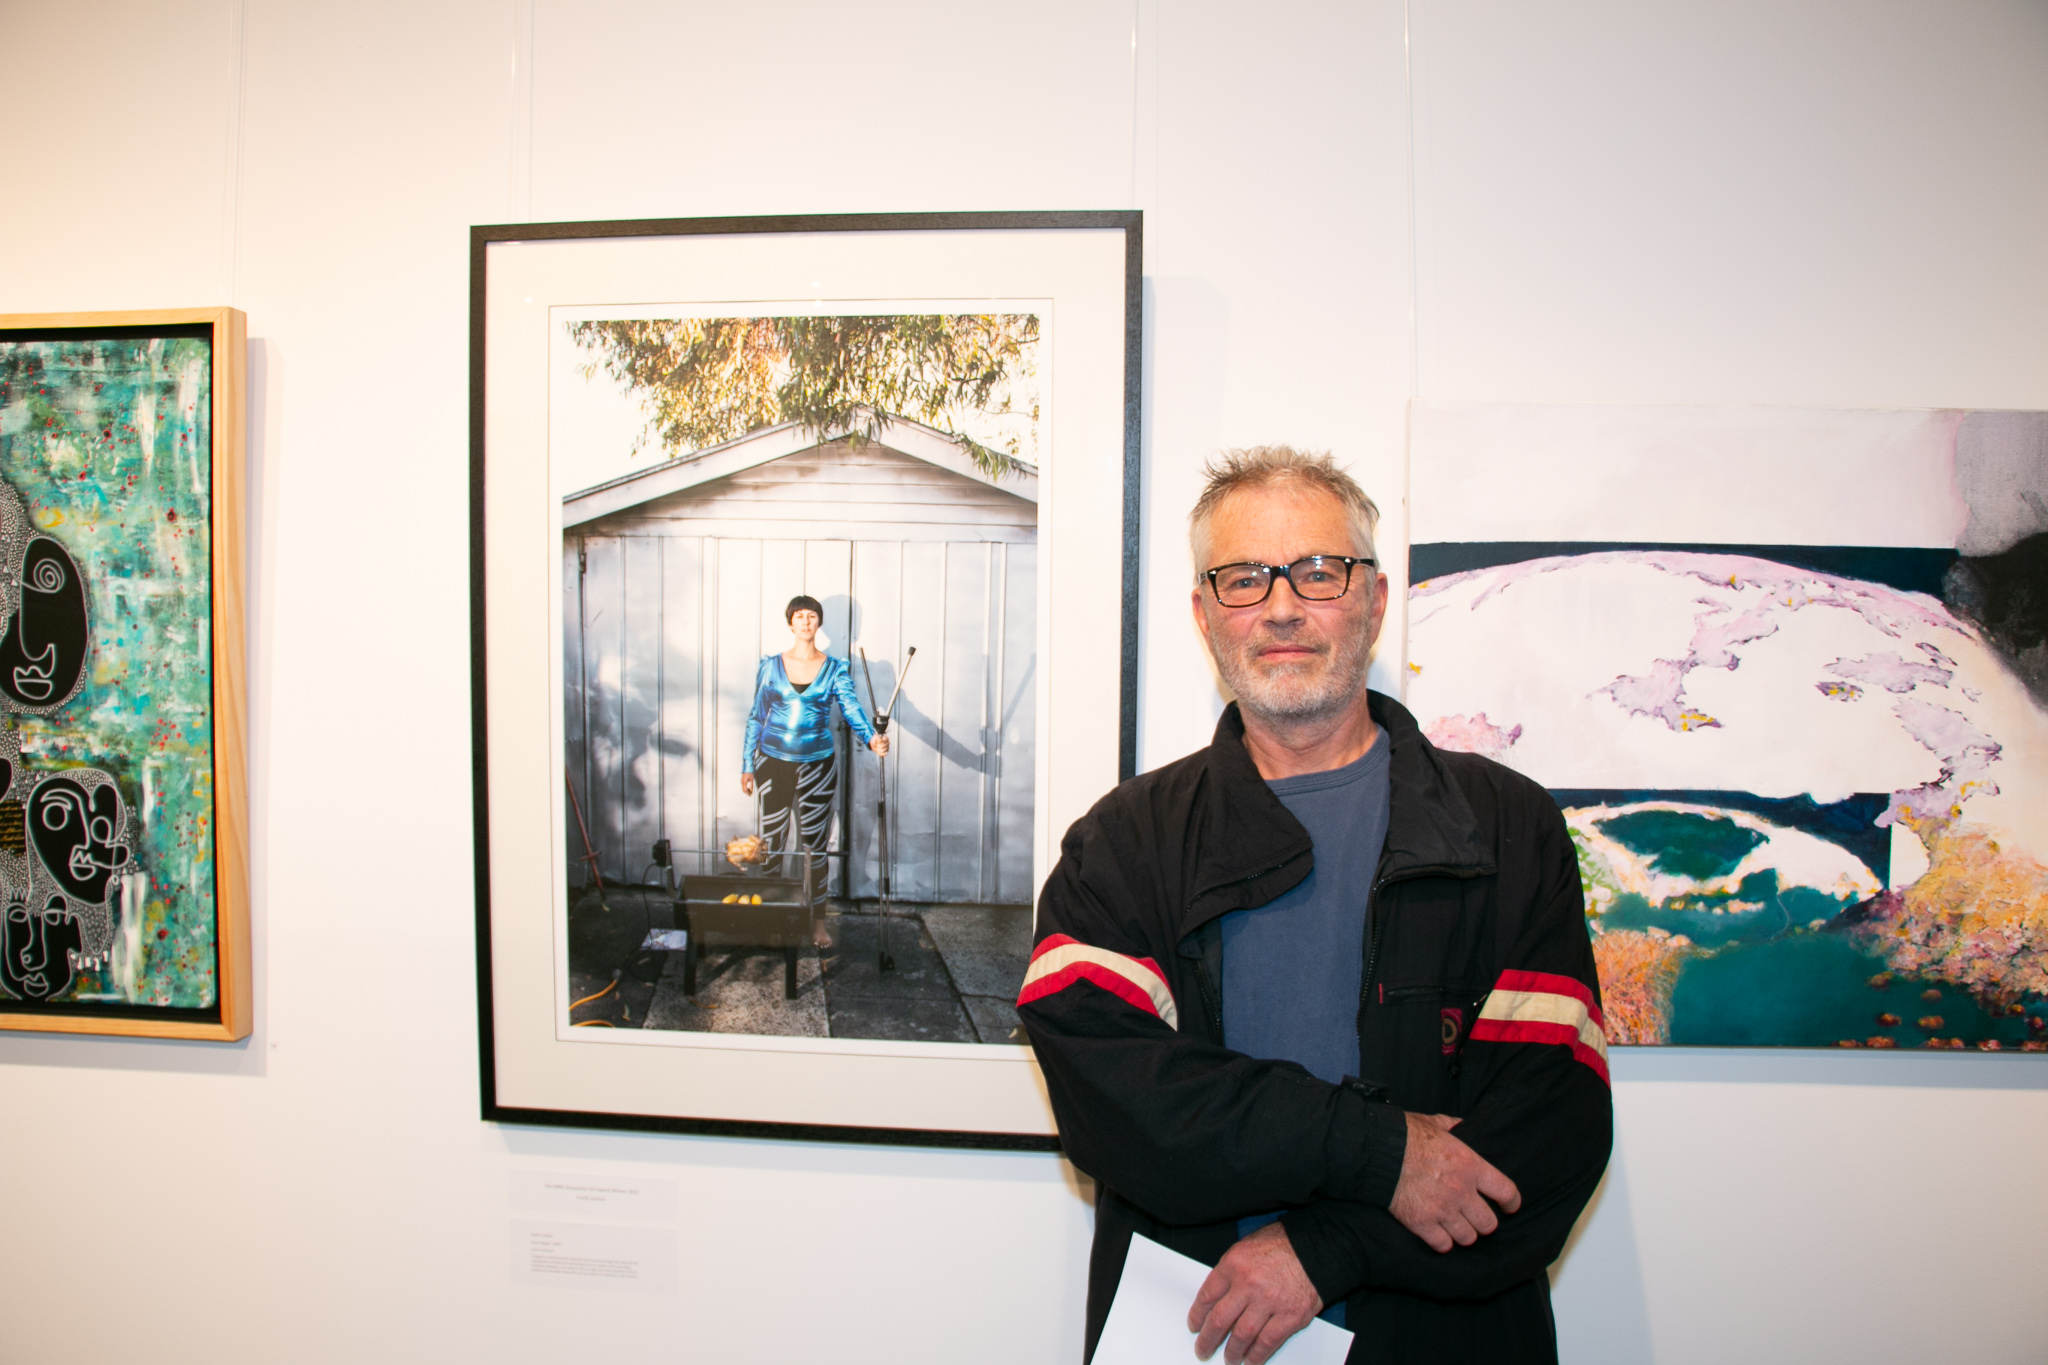 Frank Lindner with his photo Virus Prepper - winner of the 2022 QPRC Art Award acquisitive prize